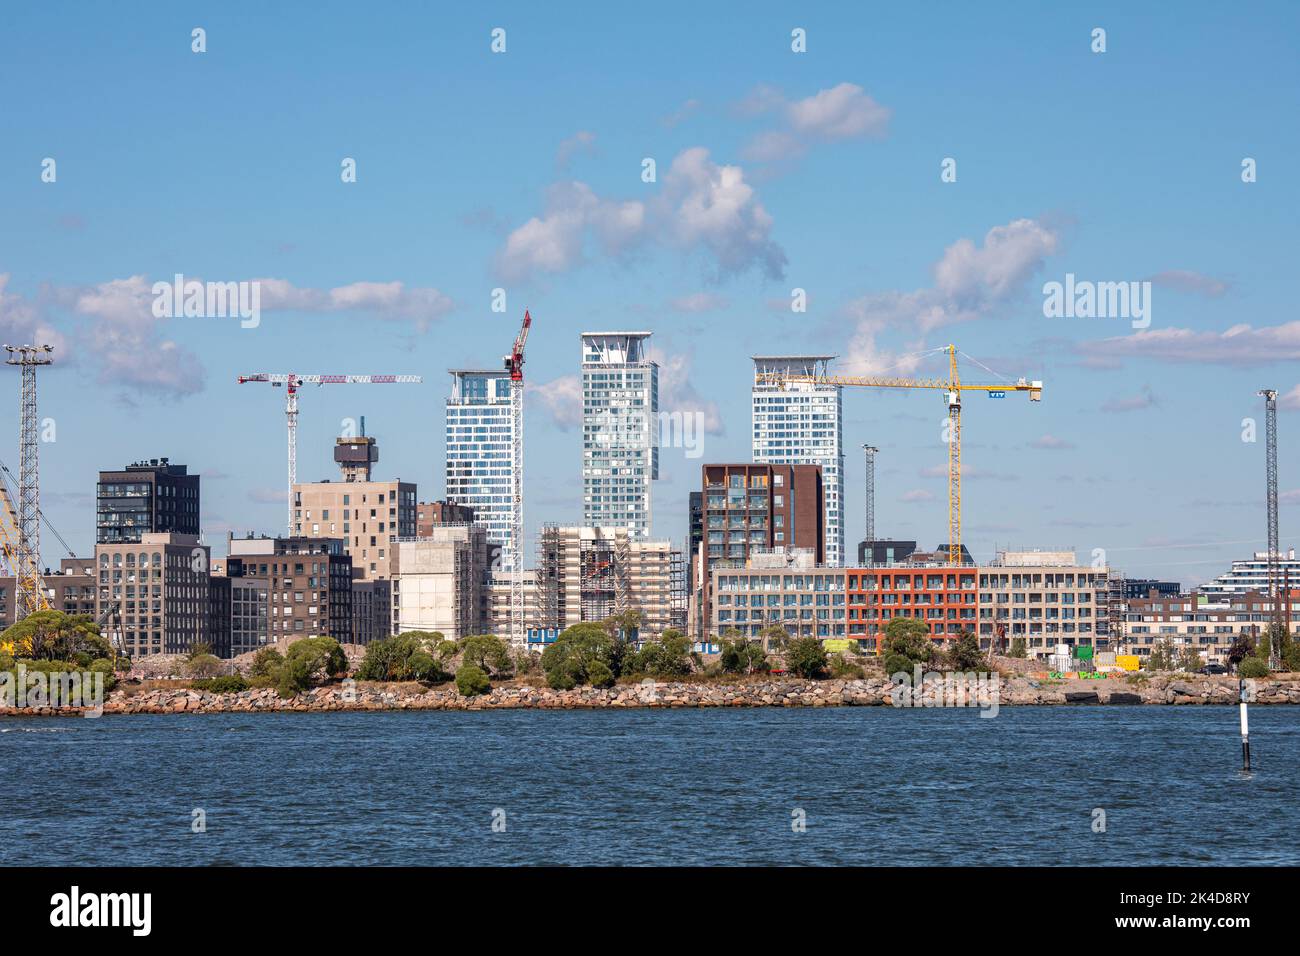 Newly built Sompasaari district, still partly under construction, with Kalasatama high-rise buildings in the background in Helsinki, Finland Stock Photo